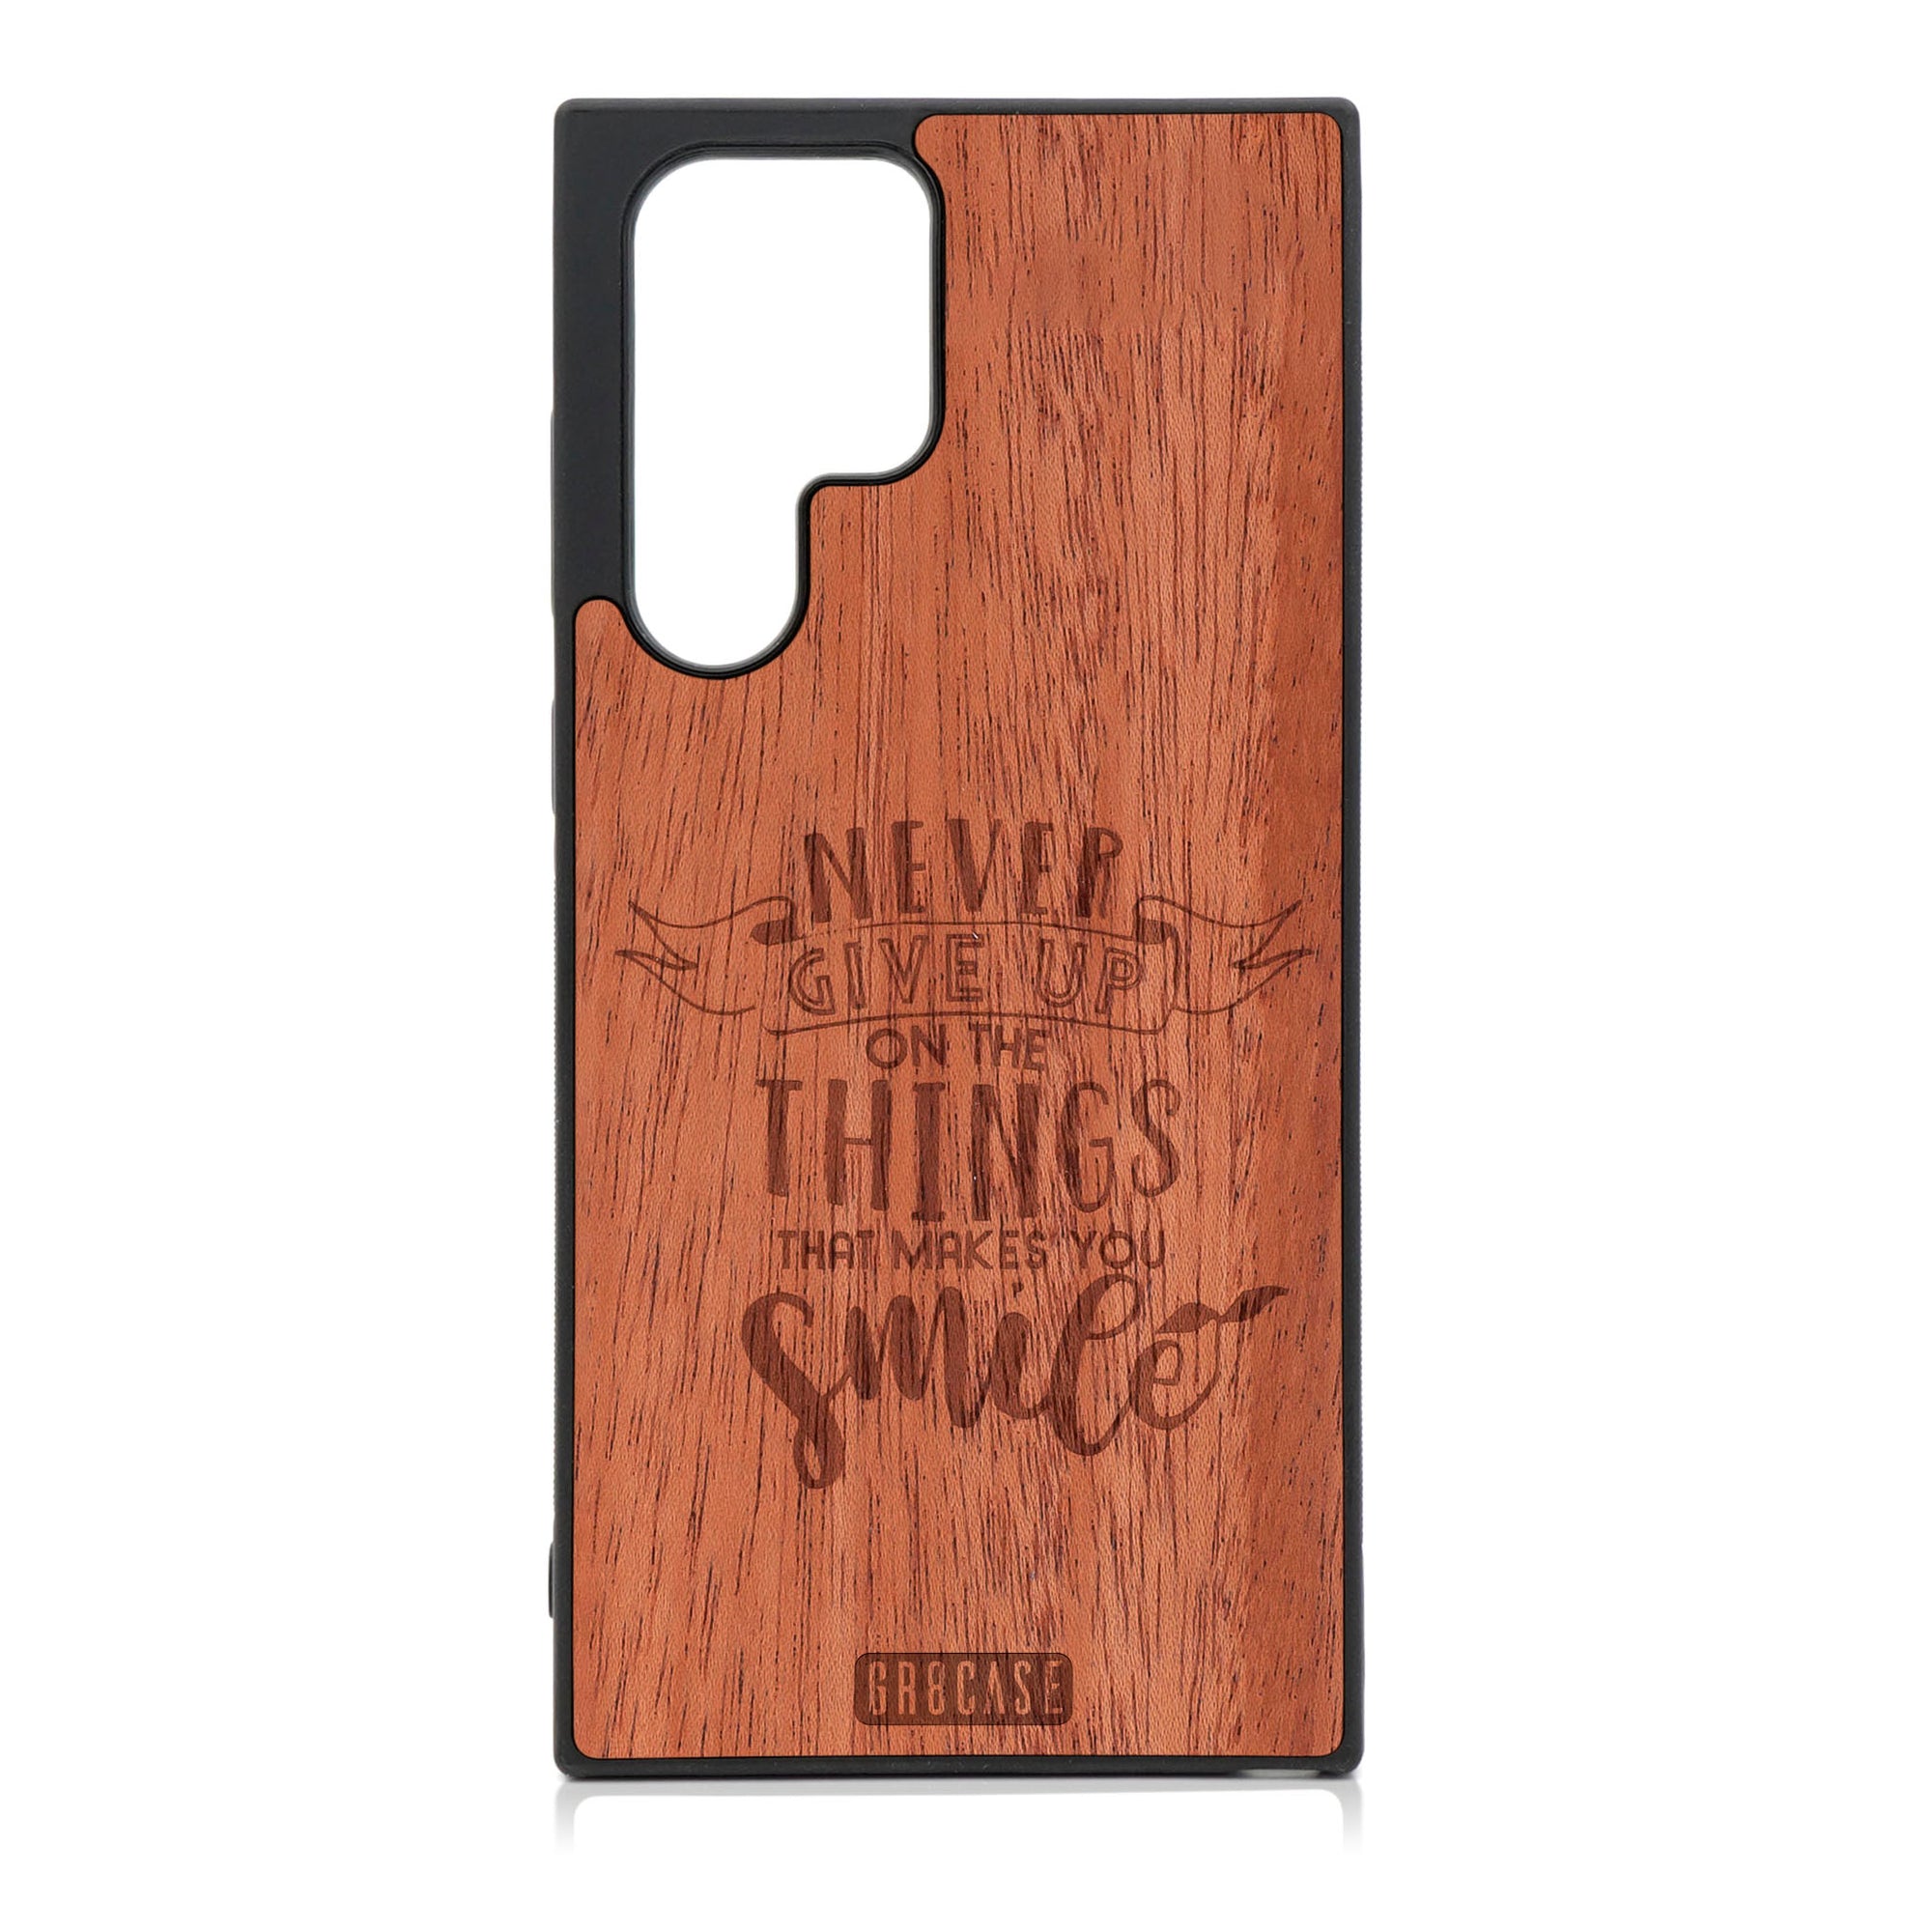 Never Give Up On The Things That Make You Smile Design Wood Case For Galaxy S22 Ultra